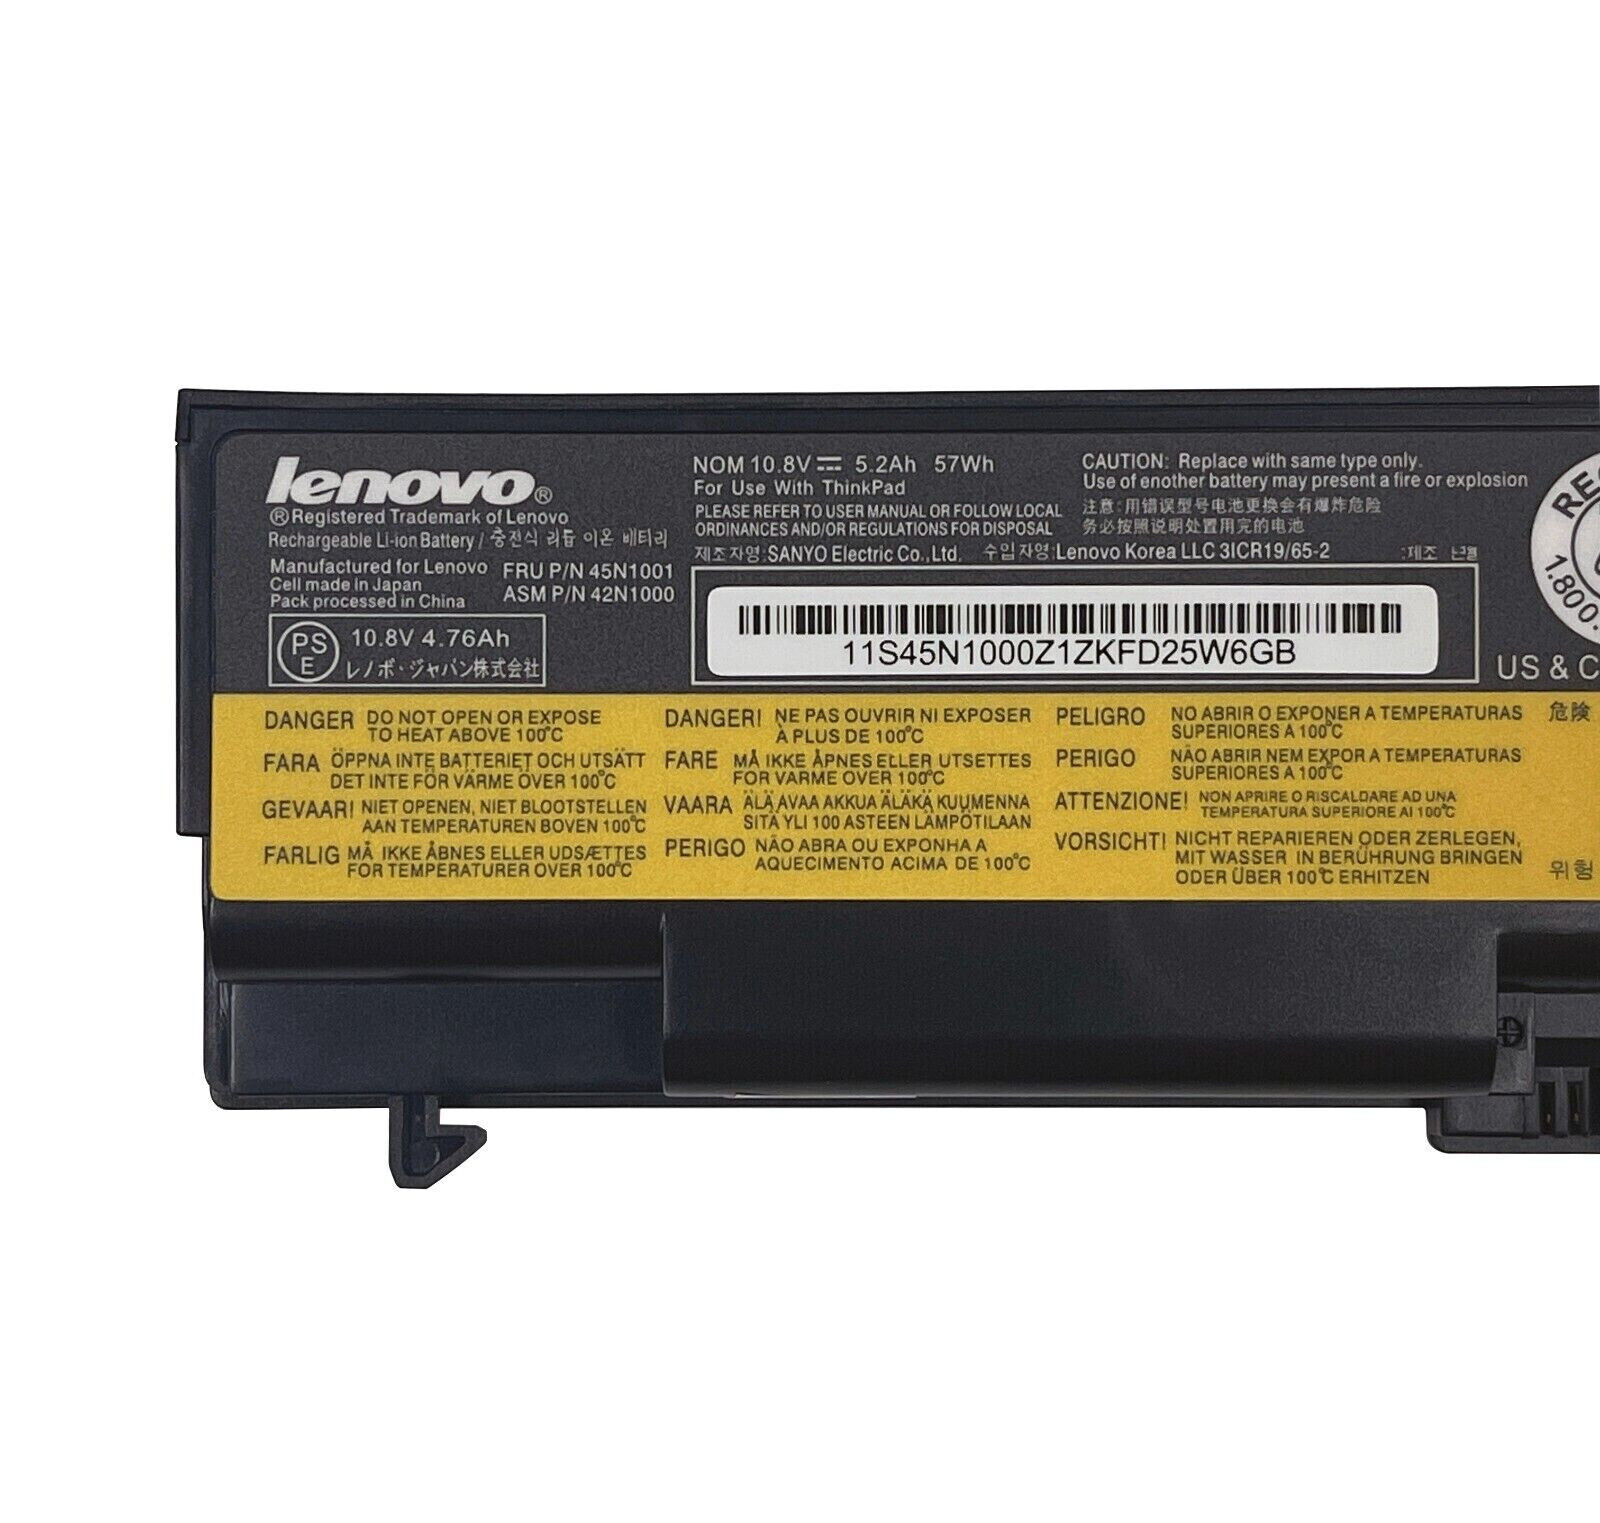 Genuine 57Wh 45N1001 Battery For Lenovo Thinkpad T410 T420 T430 T510 0A36302 NEW